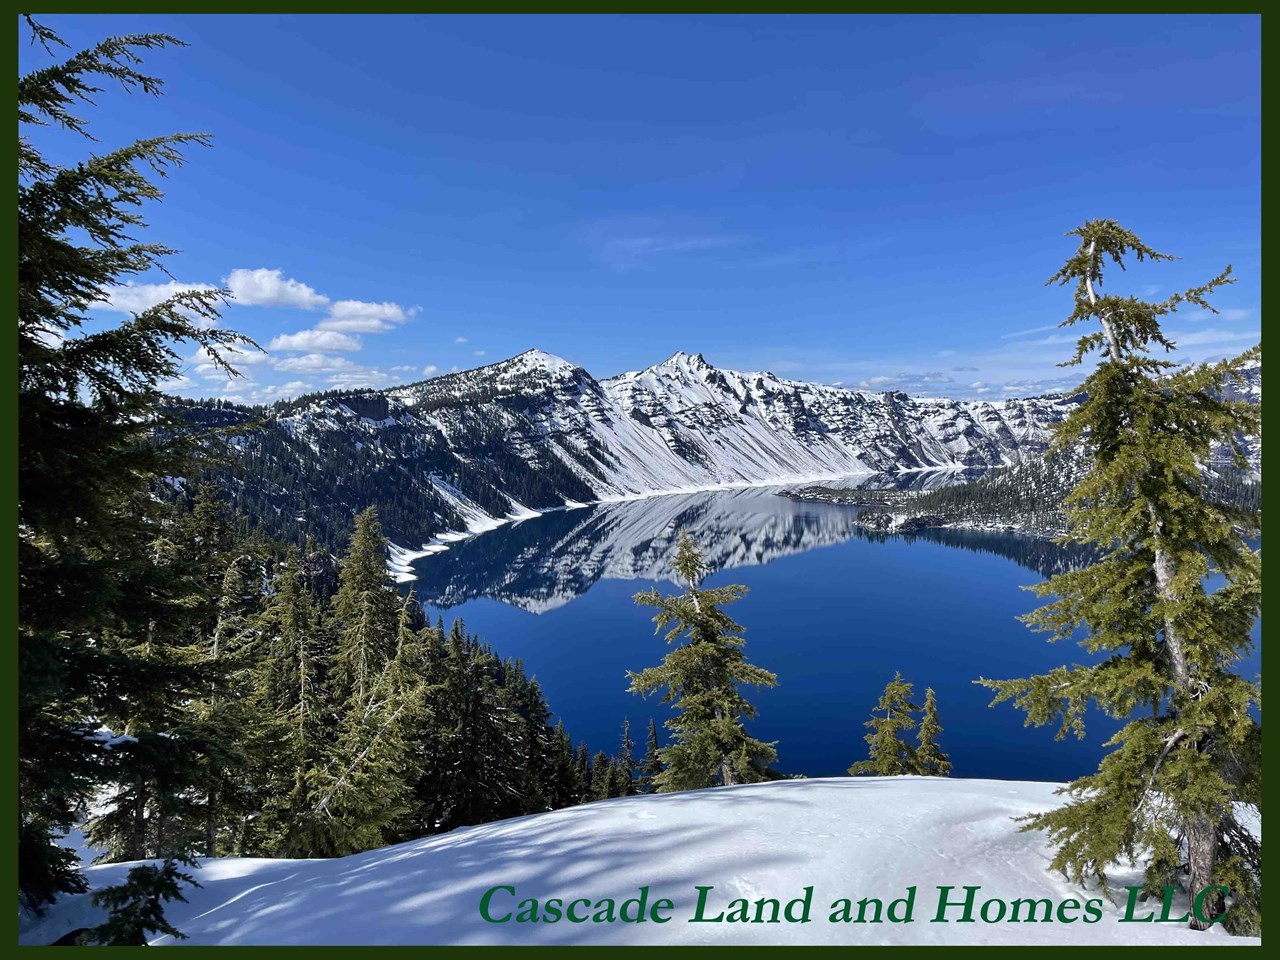 crater lake national park is just 40 miles away and is oregon’s only national park! crater lake is fed from rain and snow melt and is amazingly clear. at 1,949 feet deep, it is the deepest lake in the nation and is absolutely breathtaking! the entire park is unbelievably beautiful!